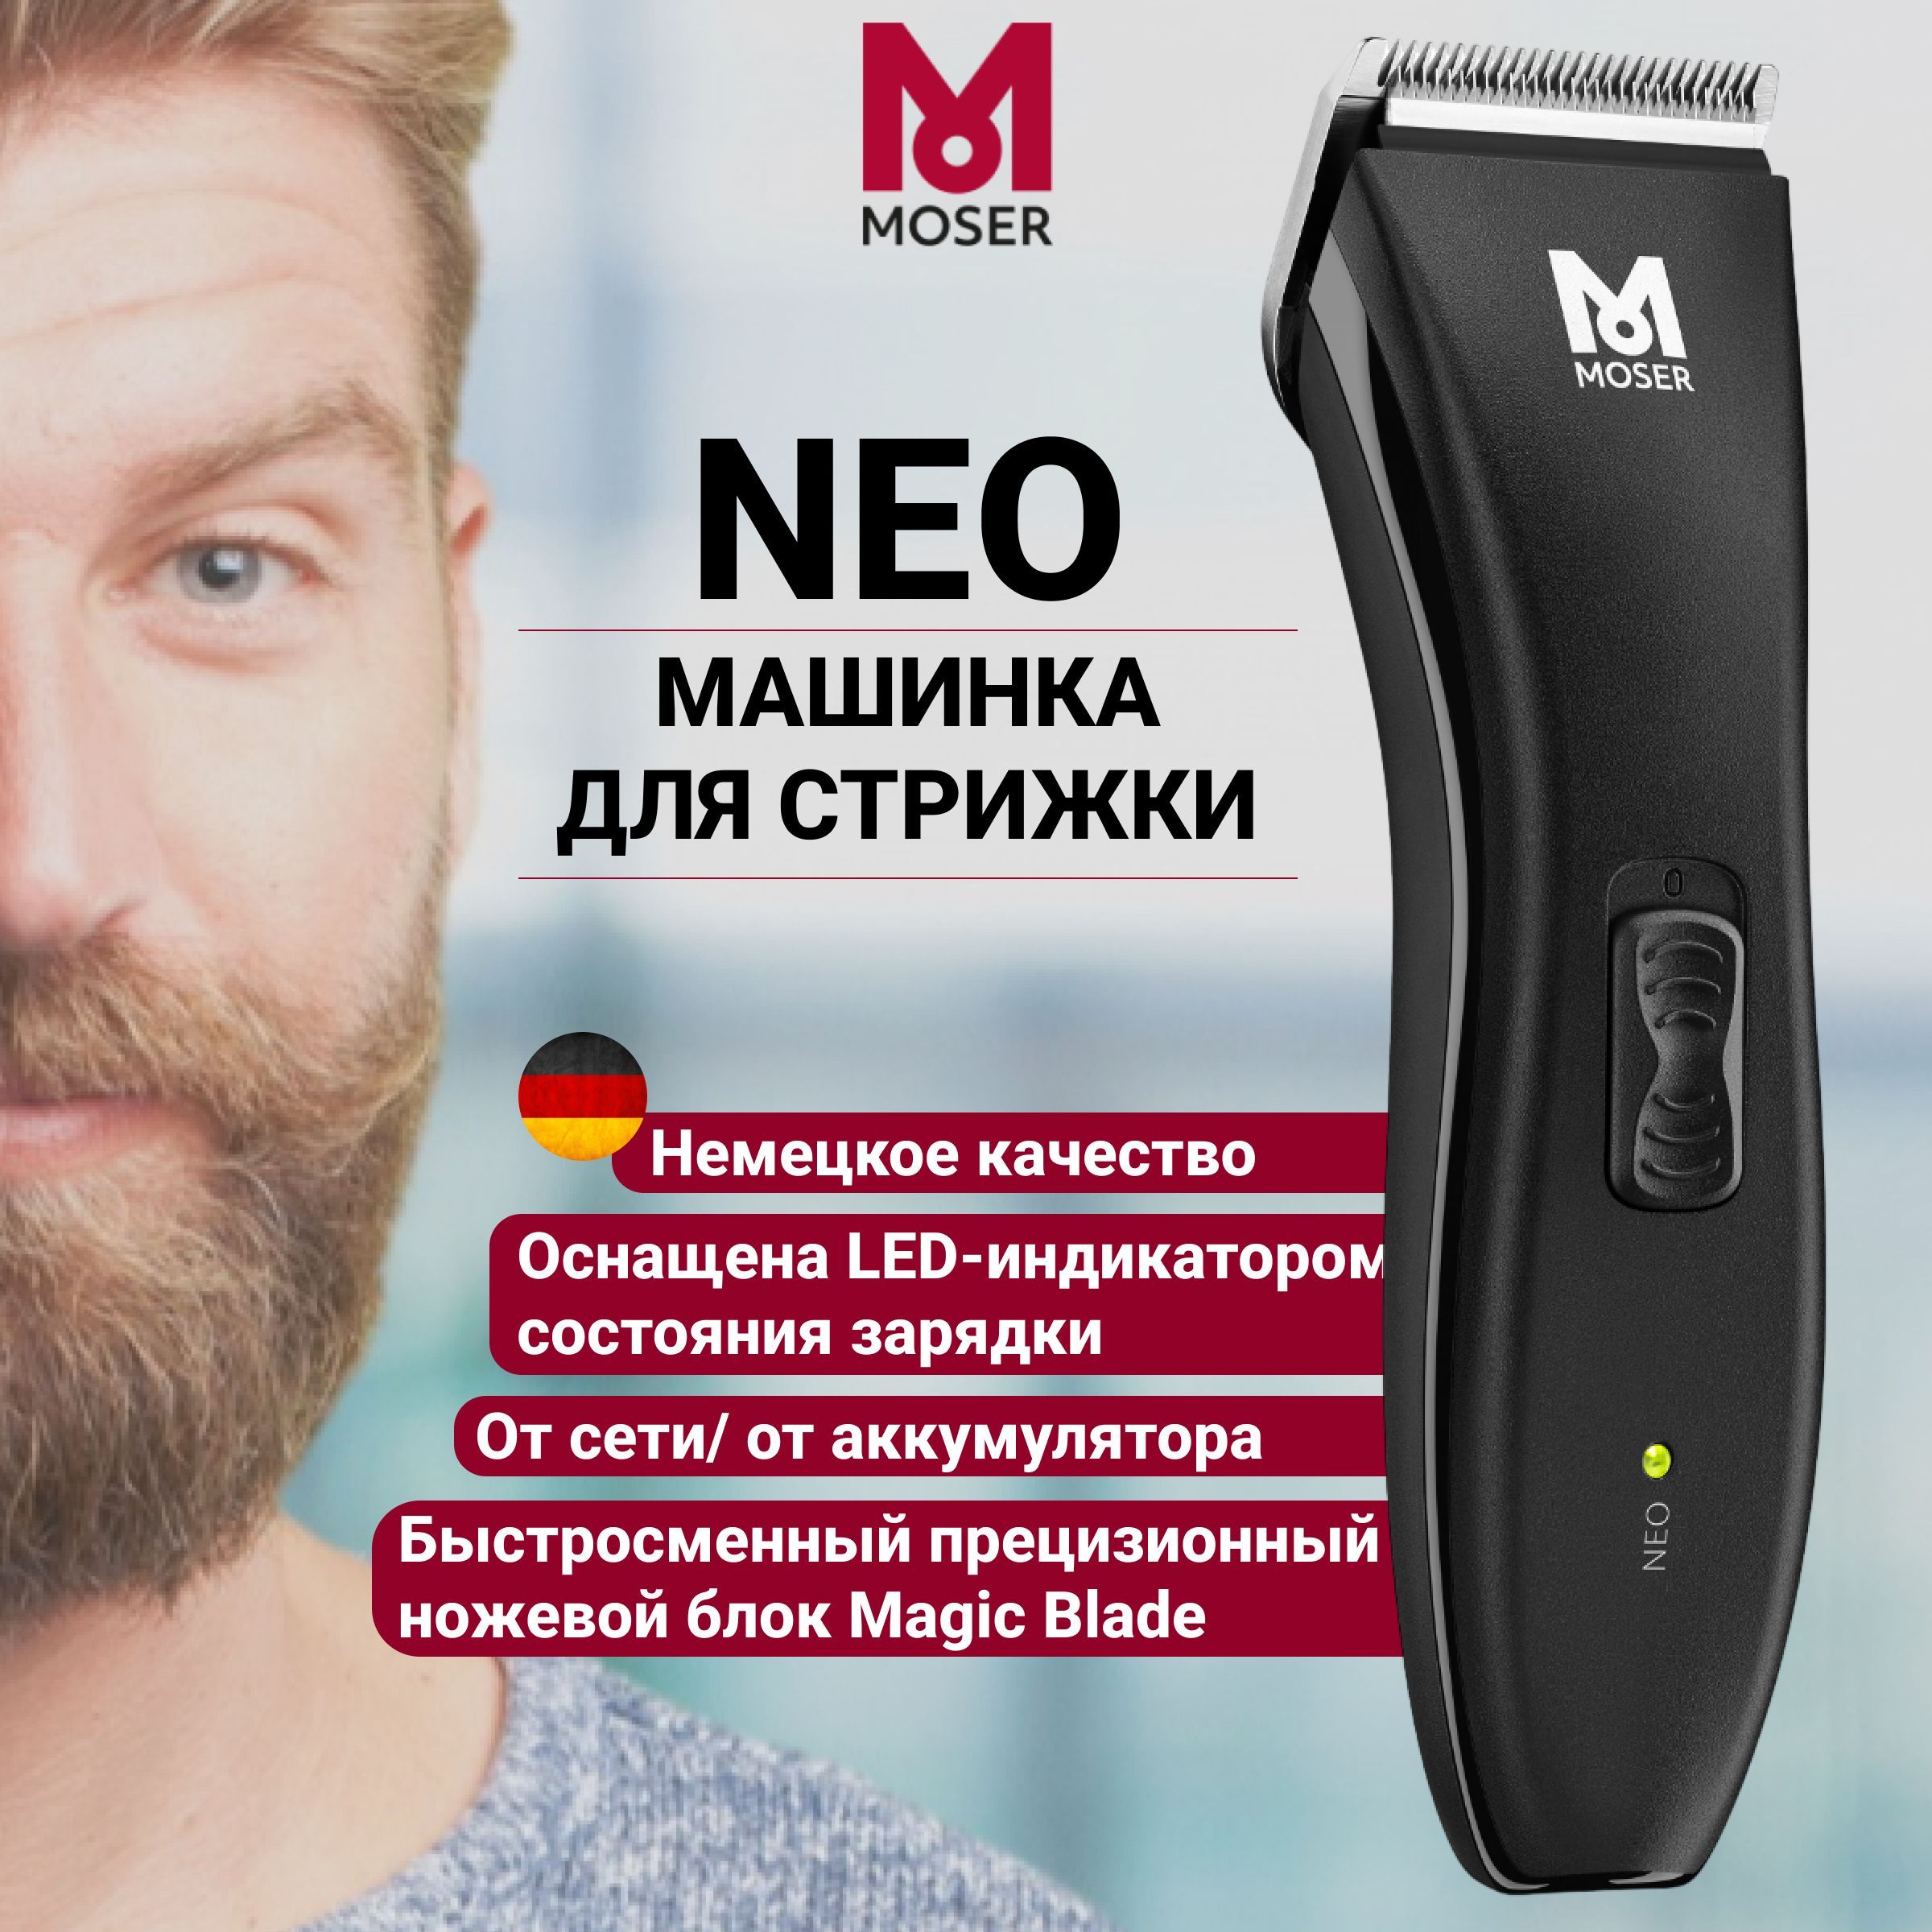 Moser 1886 0051. Moser Neo 1886-0051. Moser Neo 1886-0051 запчасти.